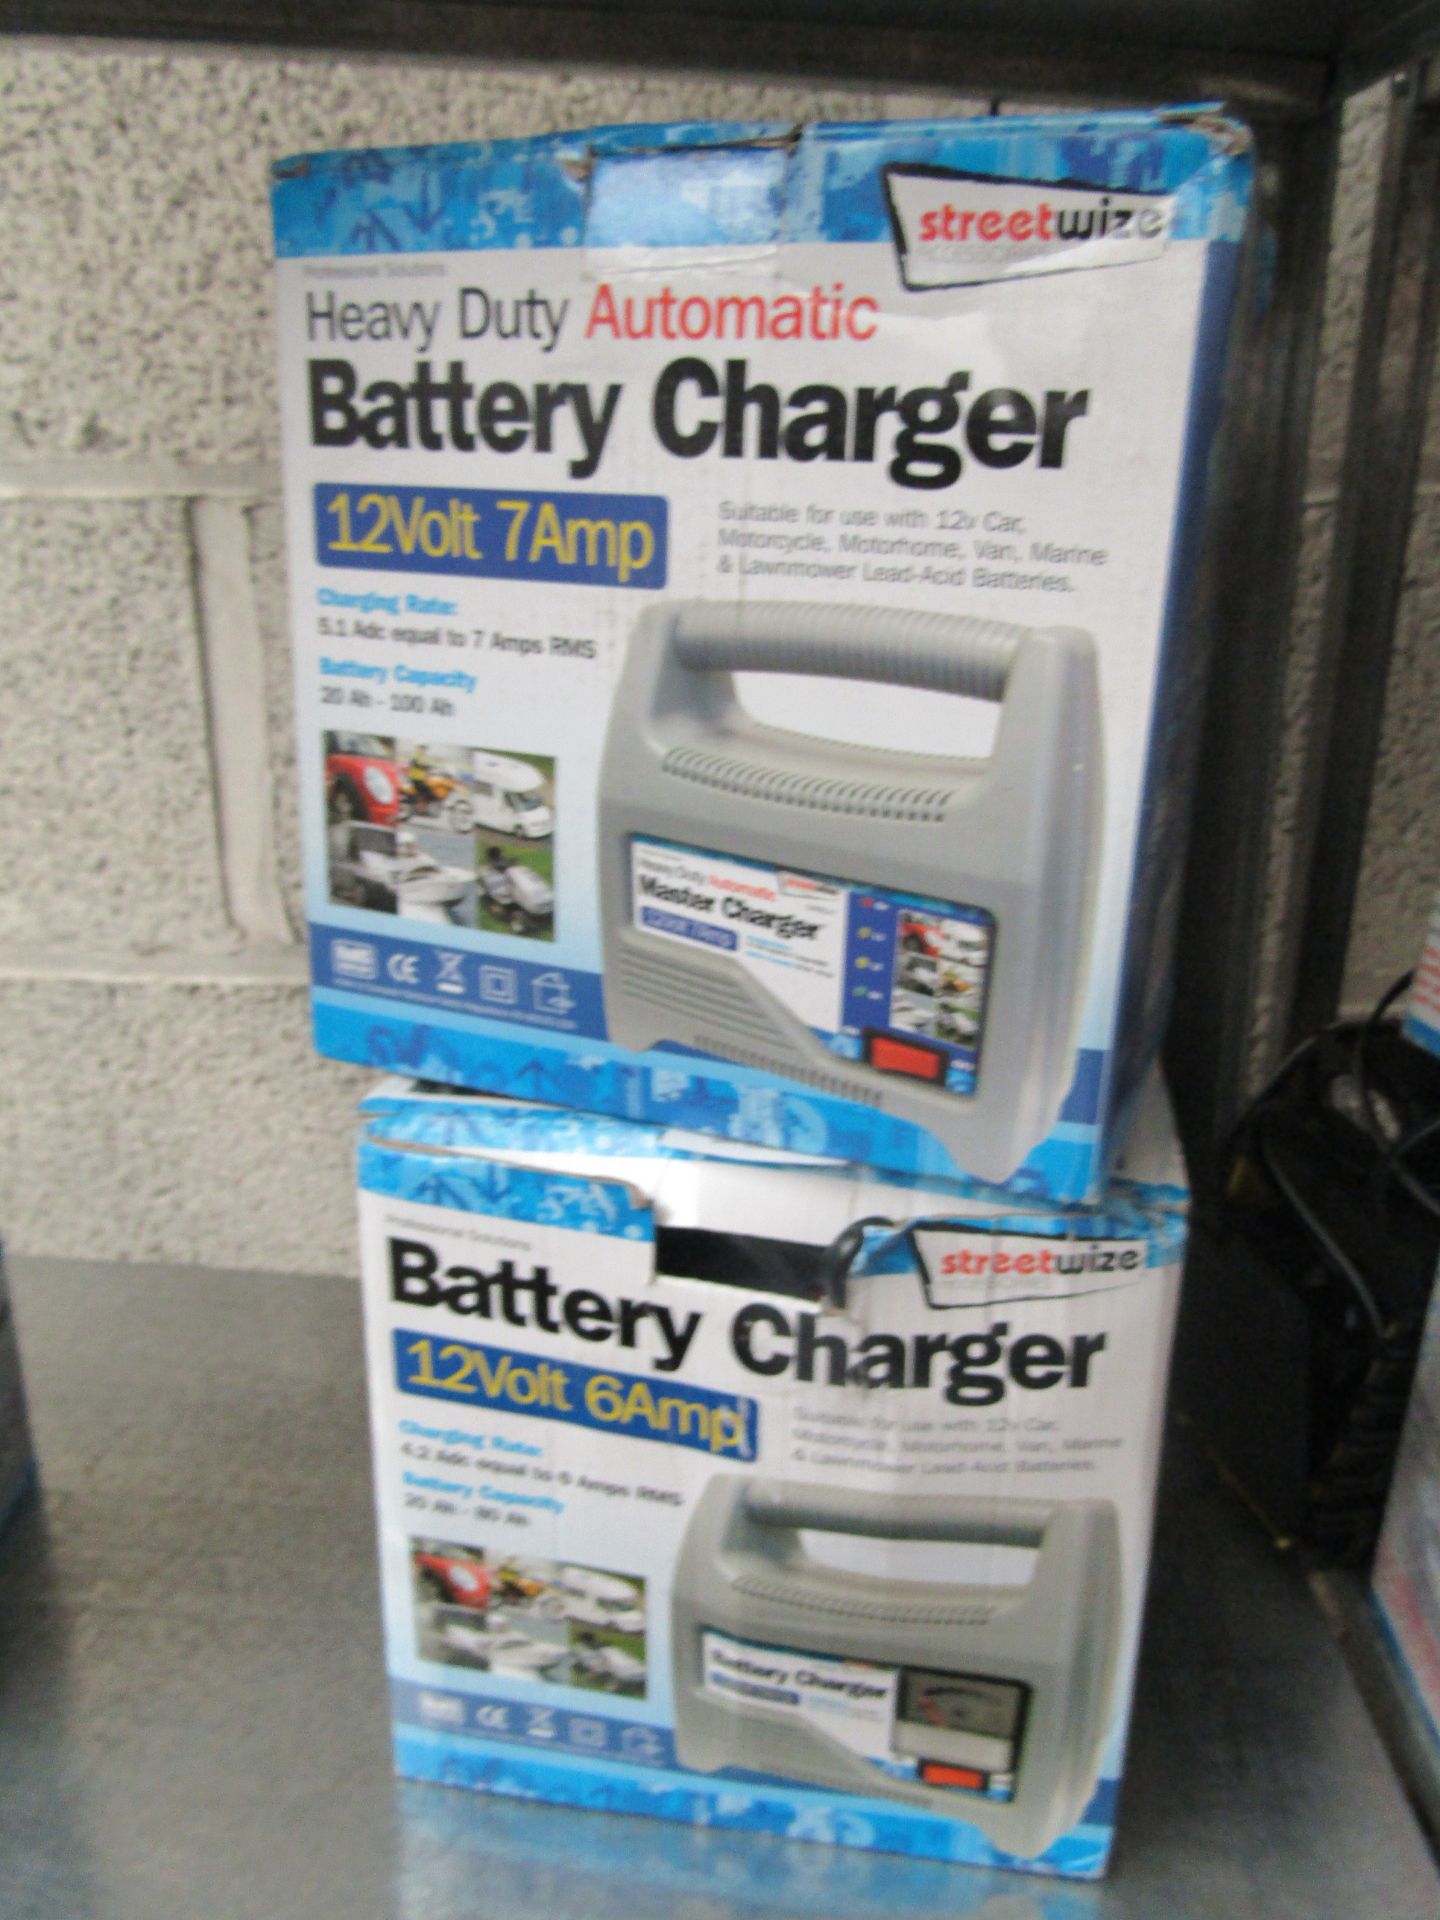 2x StreetWize 12V Battery Chargers. Boxed.